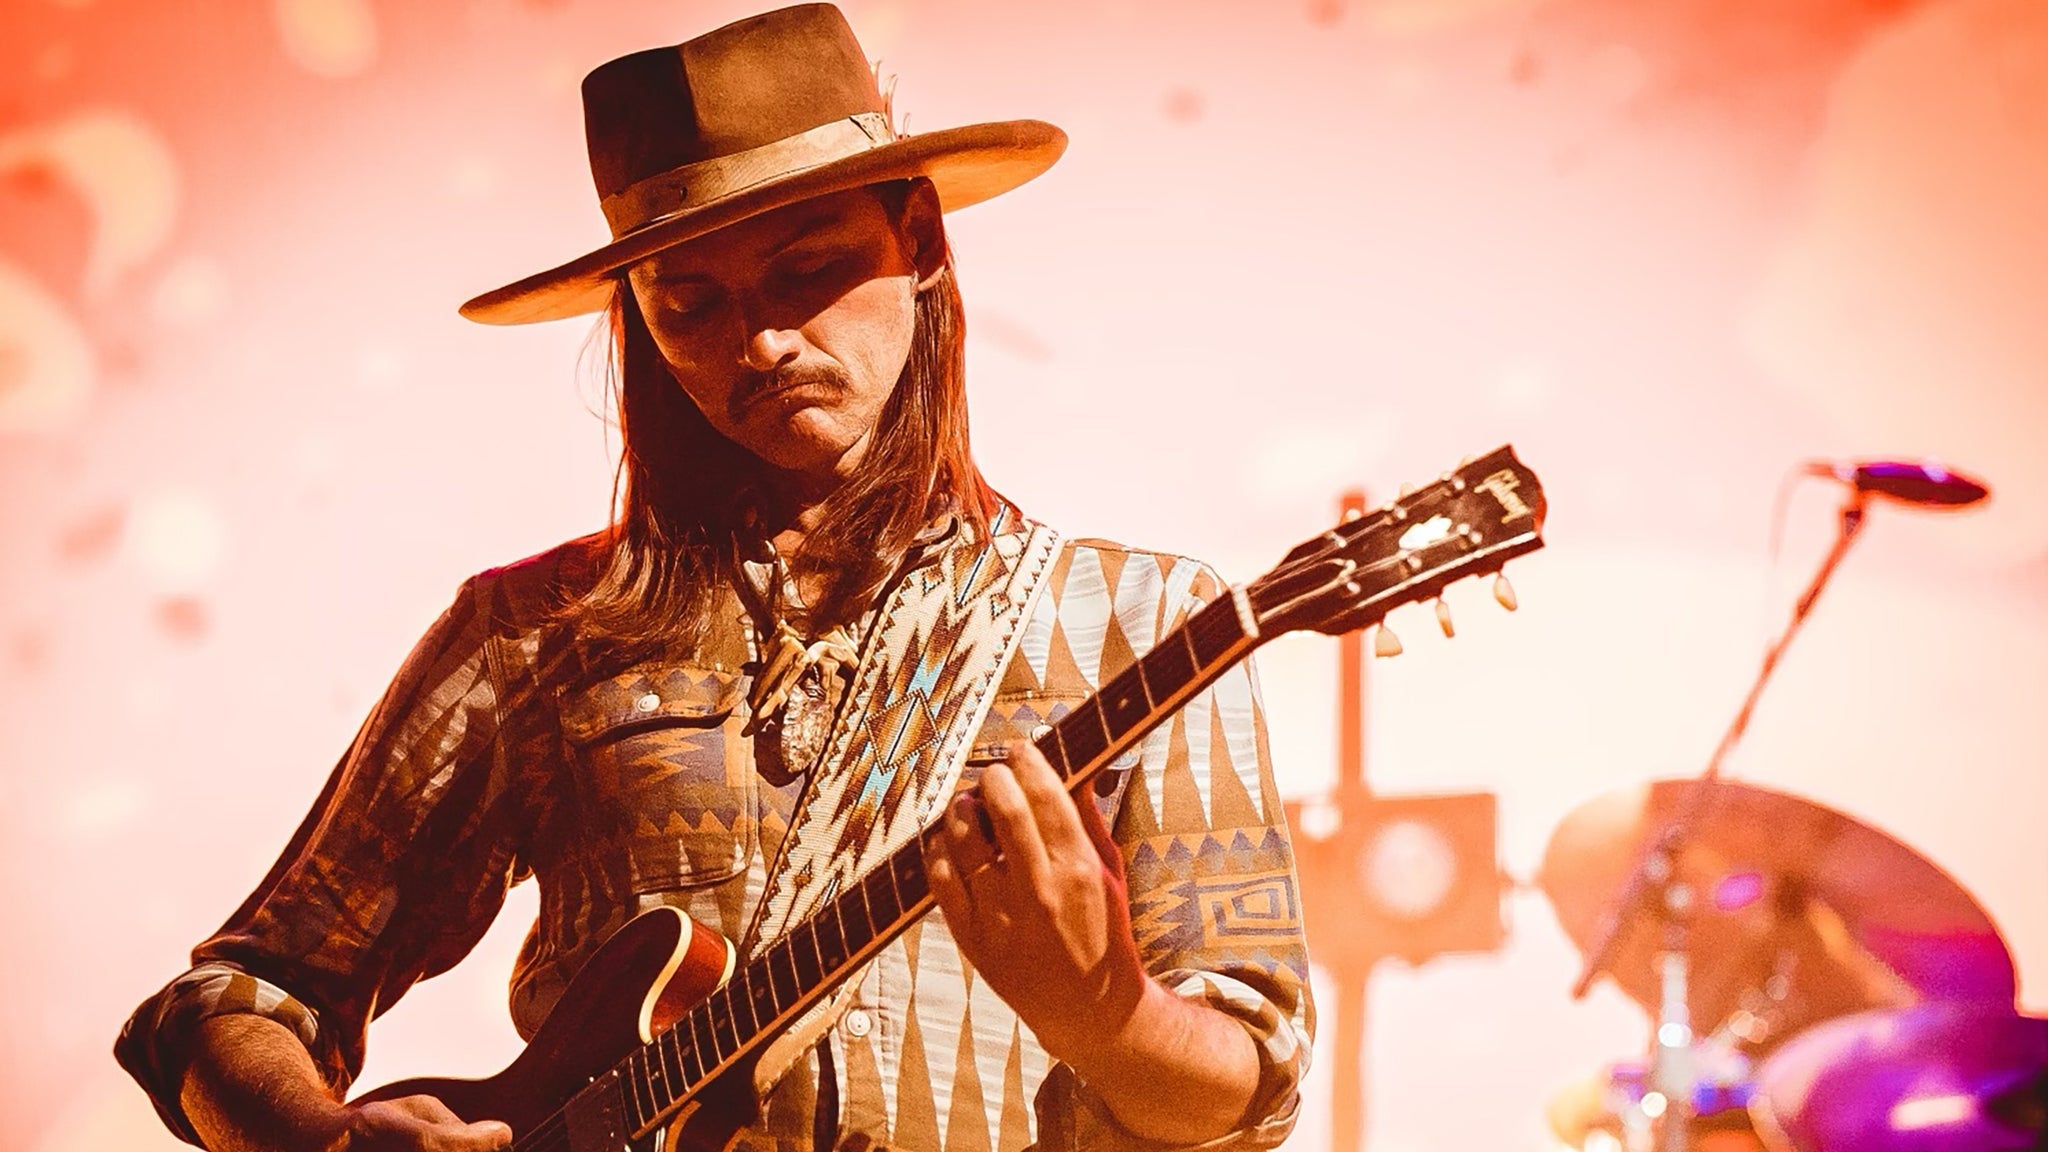 working presale password for Duane Betts & Palmetto Motel + Dustbowl Revival tickets in New York